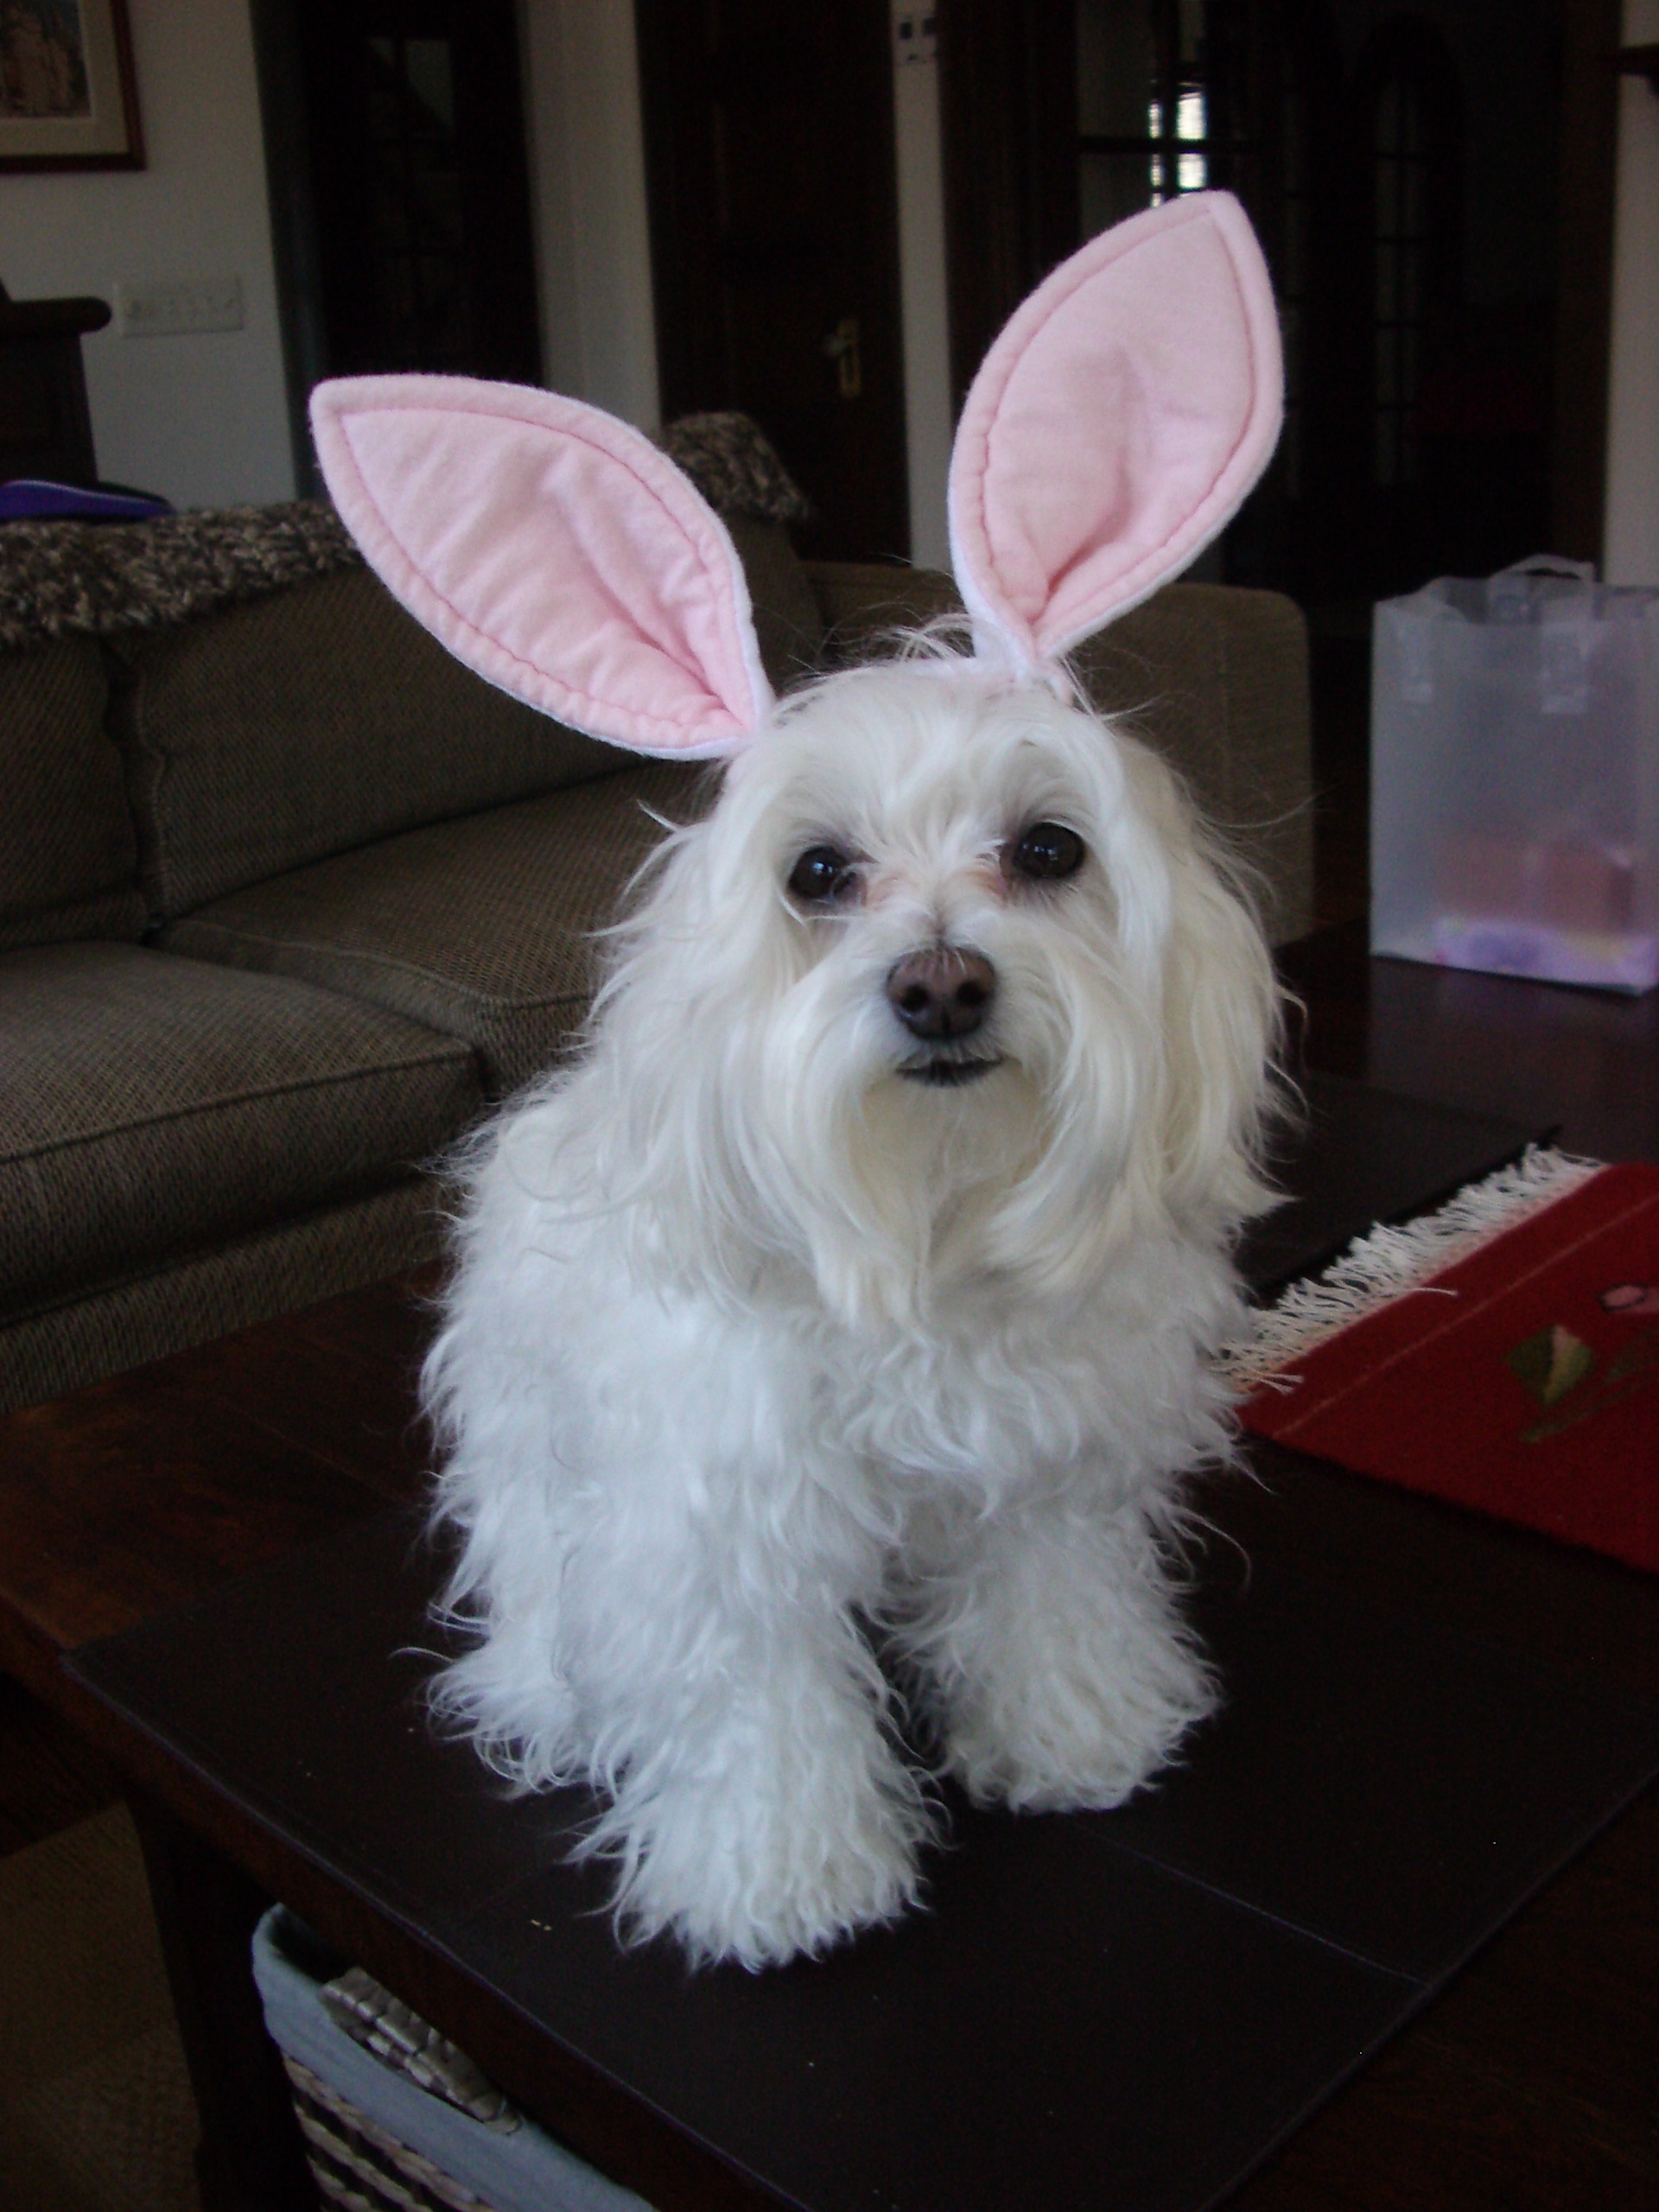 Dog with bunny ears picture - Blog Posts from Octavarius